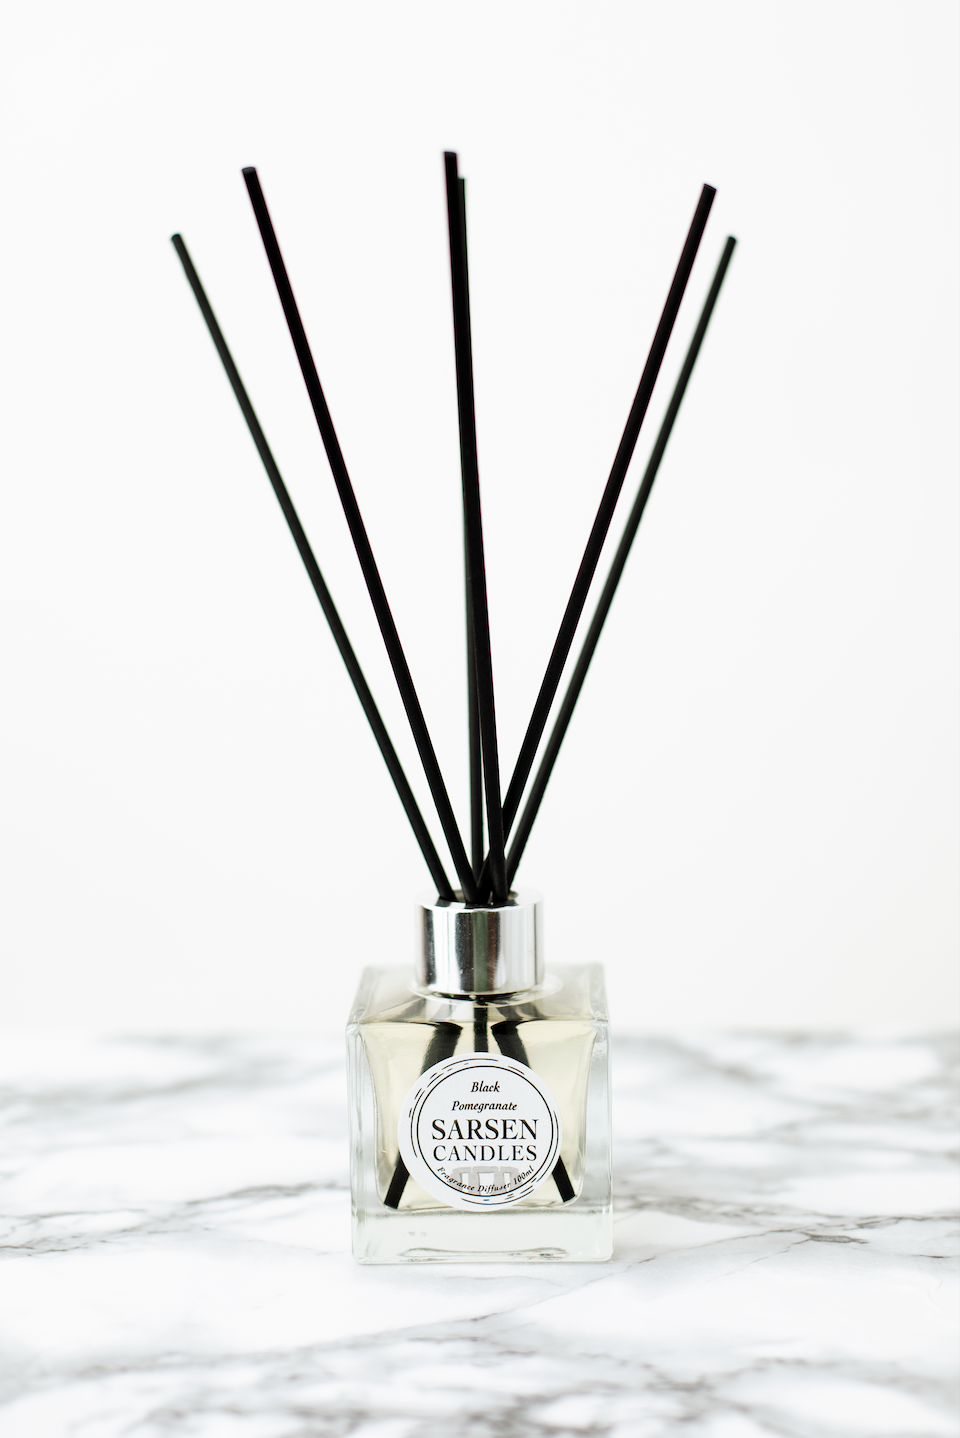 Black Pomegranate Reed Diffusers